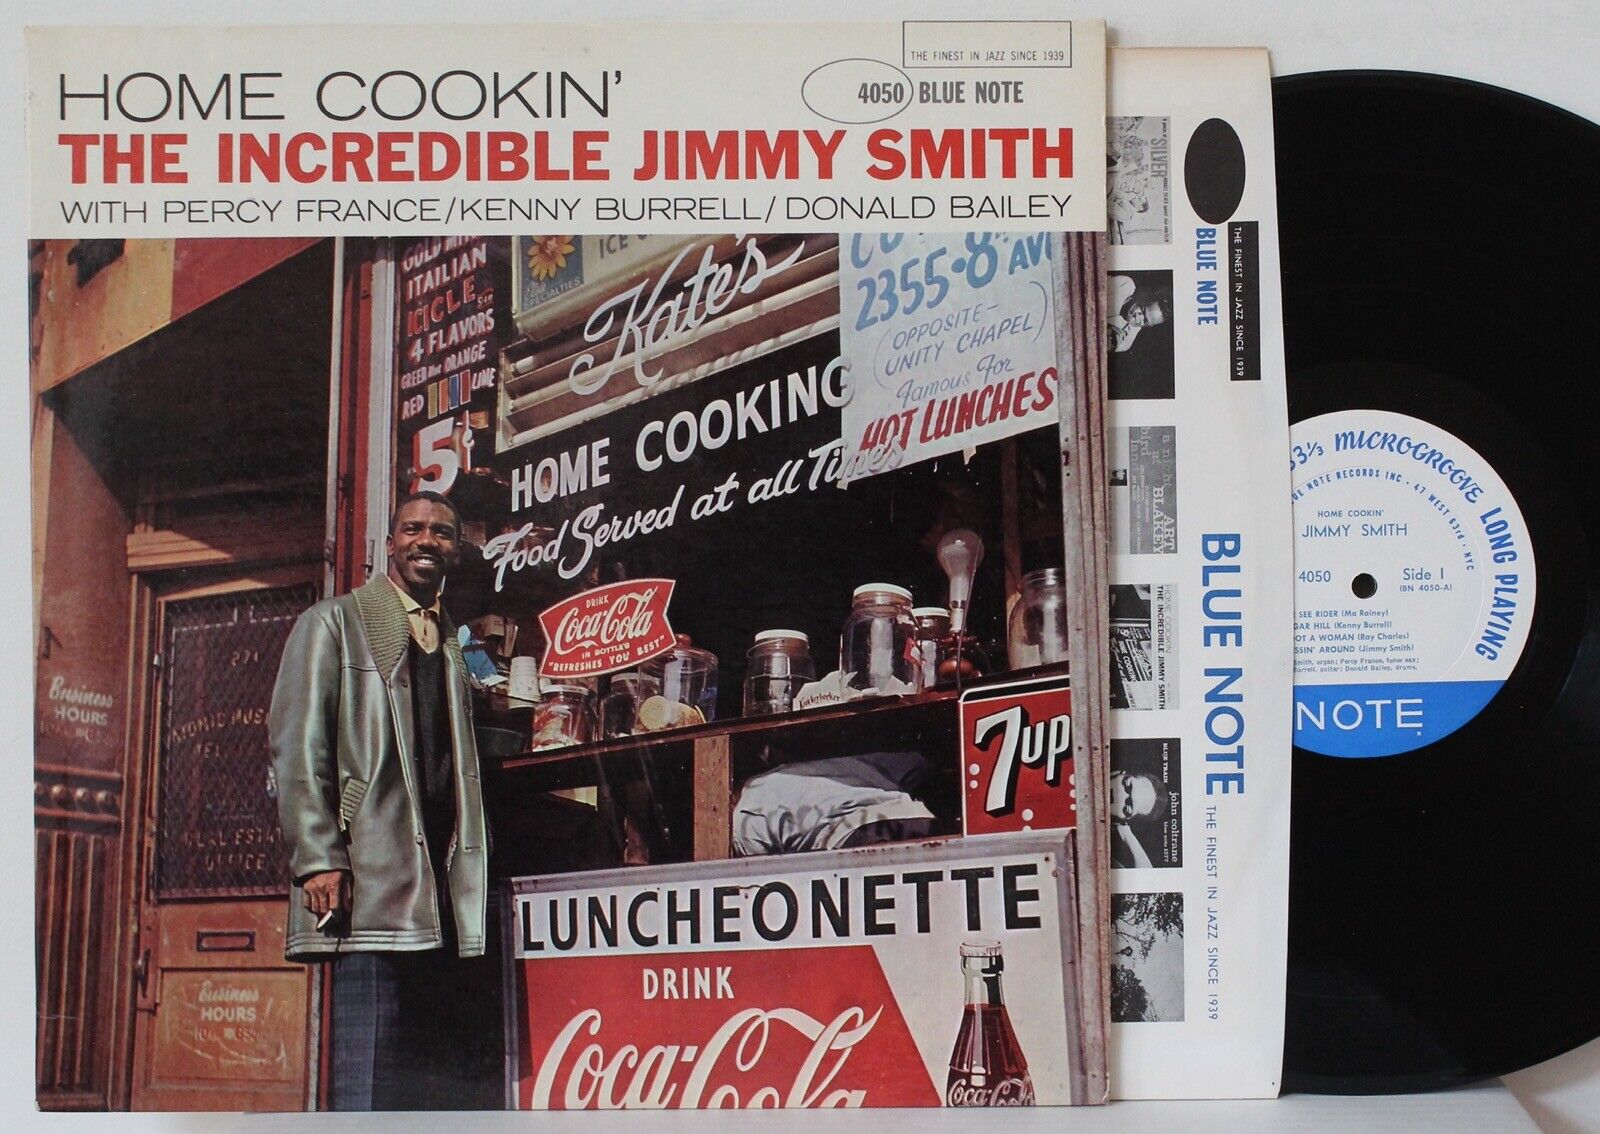 JIMMY SMITH “Home Cookin” LP (Blue Note 4050, W.63rd Ear RVG) VG++ BEAUTY